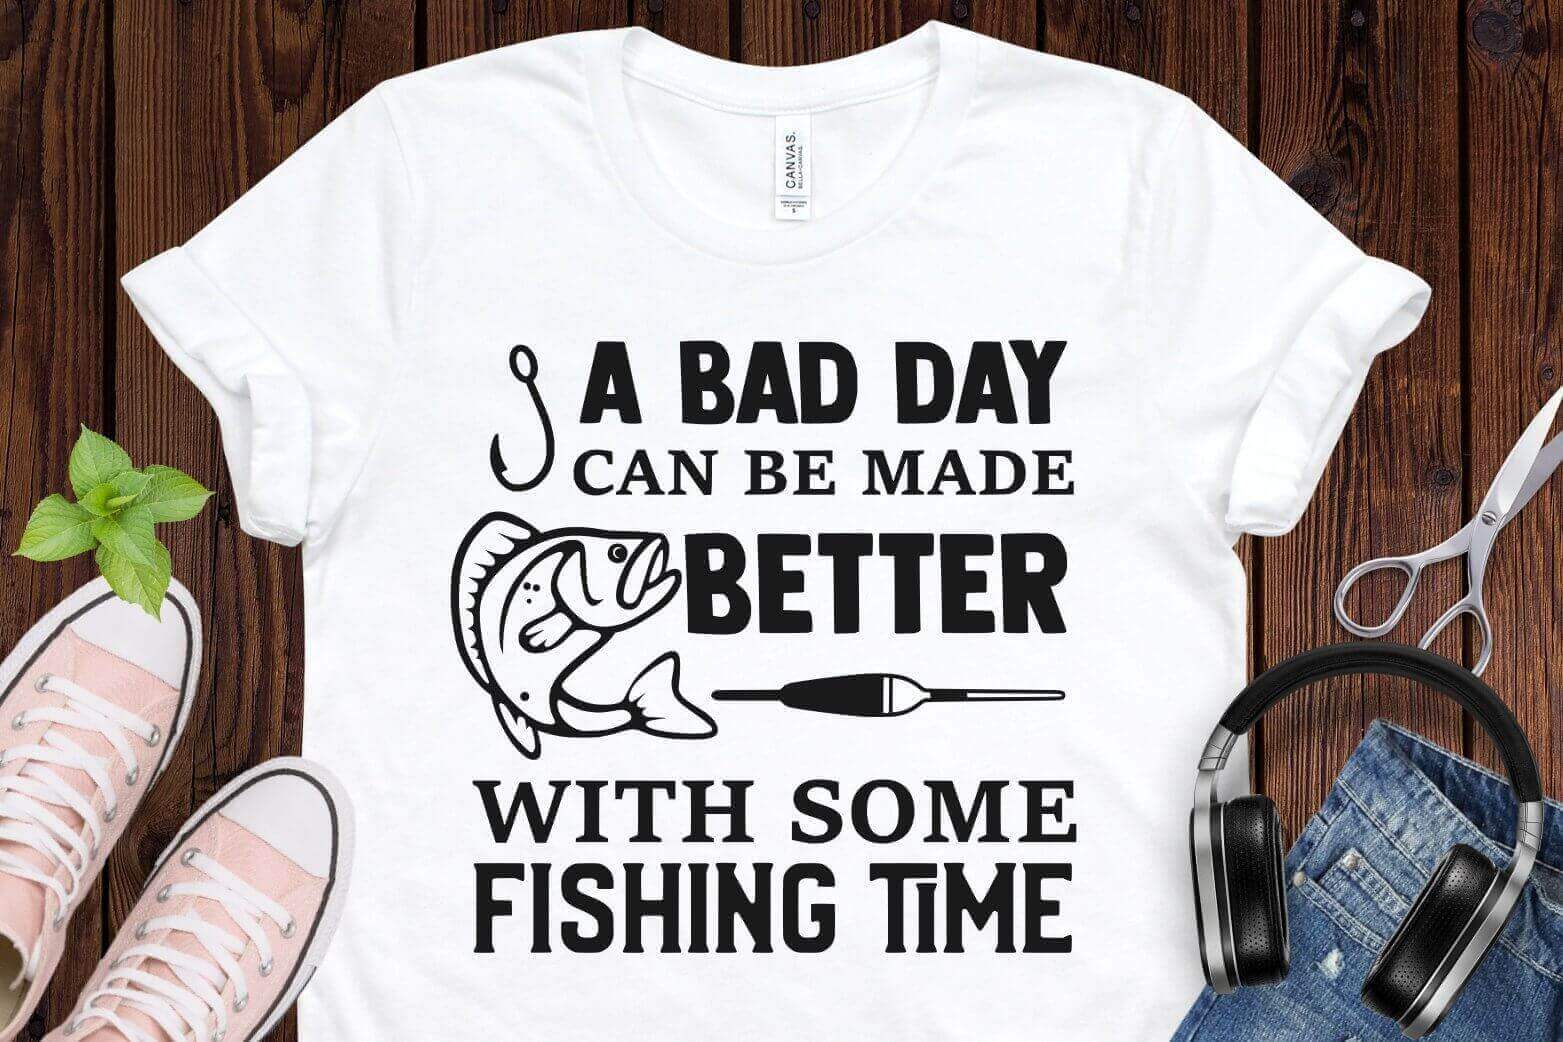 A Bad Day Can be Made Better with Some Fishing Time.